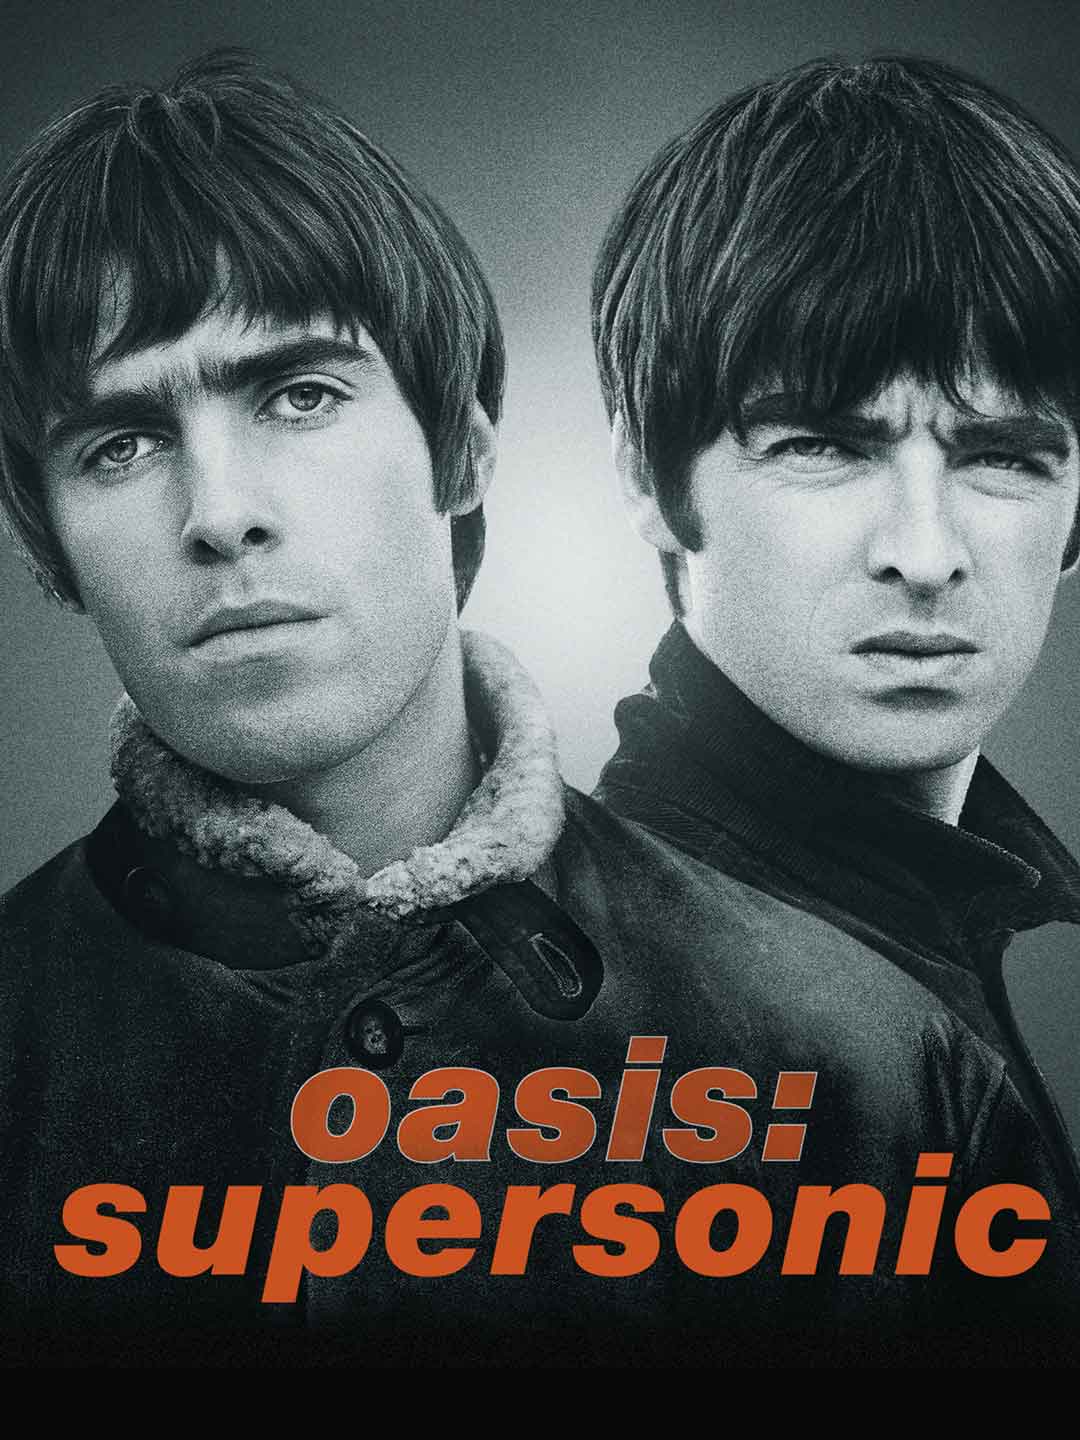 Oasis: Supersonic with Paul and Liam Gallagher